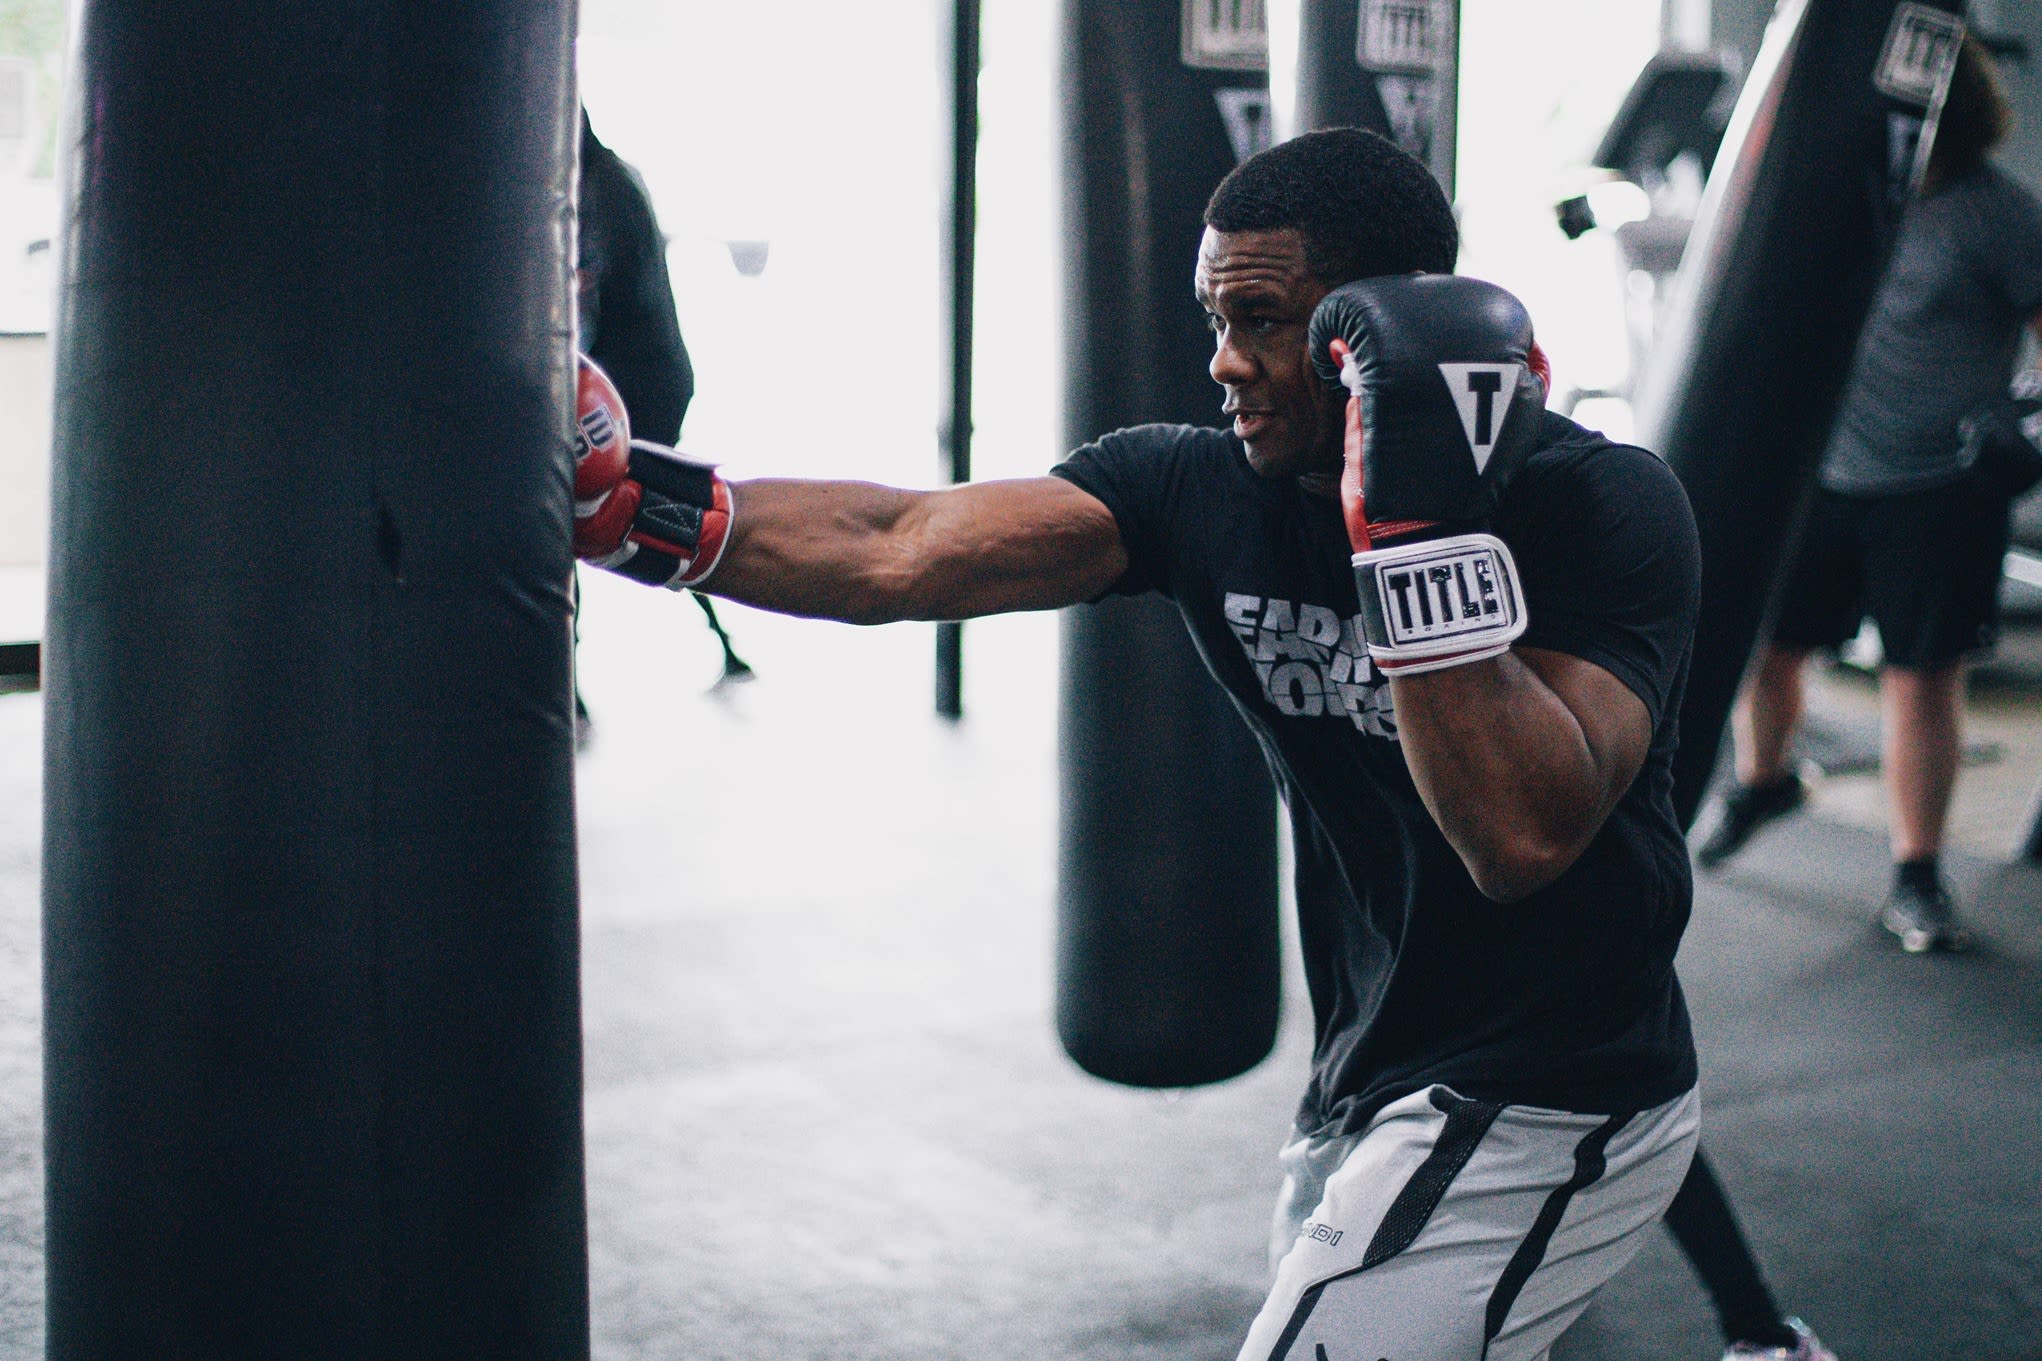 One Punch Boxing Club: Read Reviews and Book Classes on ClassPass